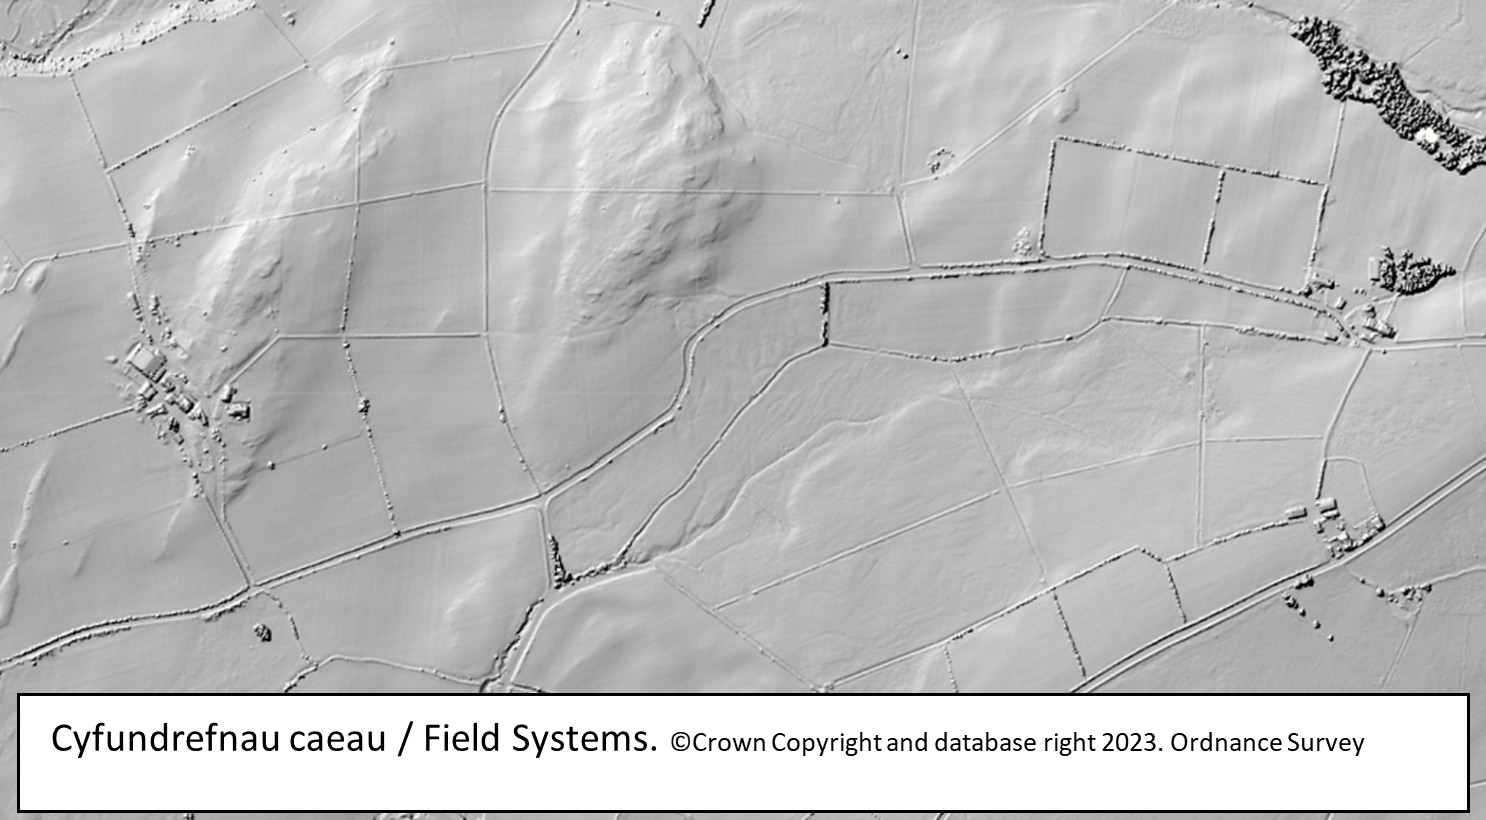 LiDAR image of field systems in Wales